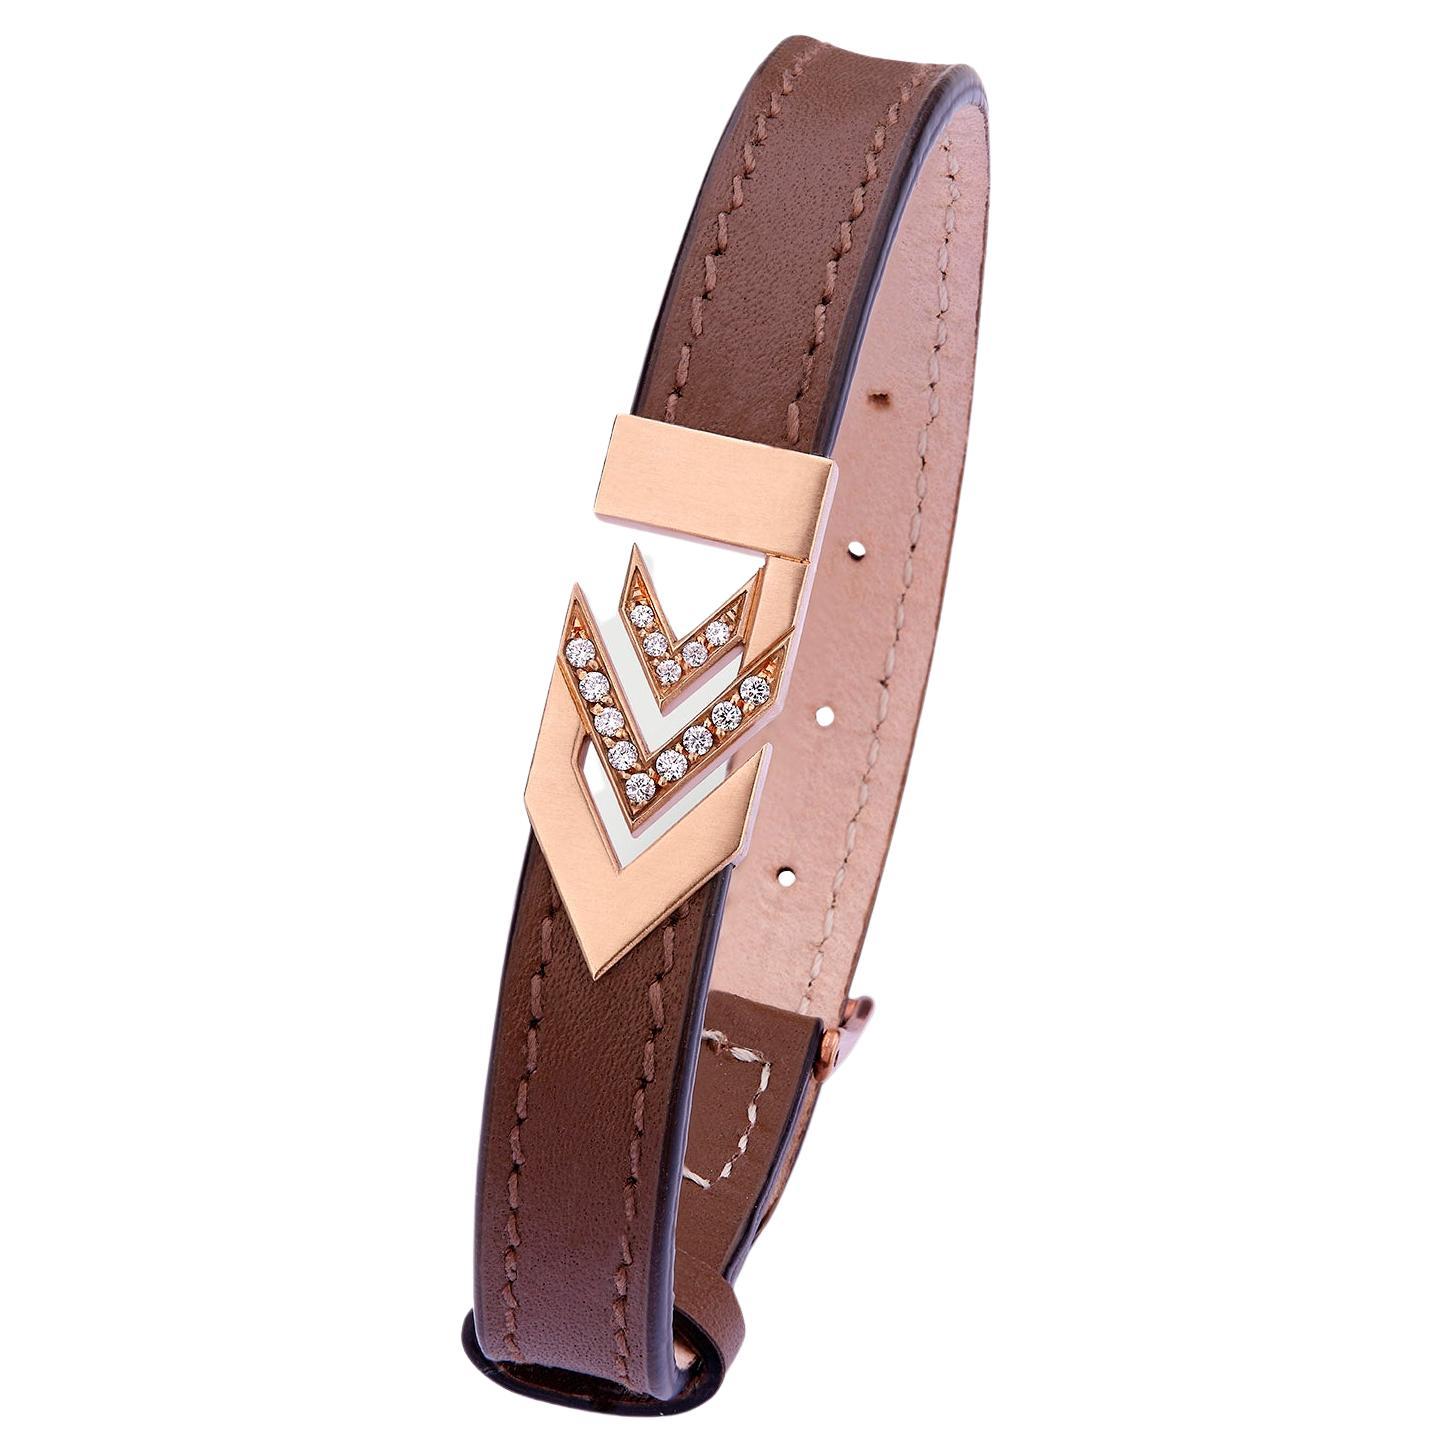 Leather Bracelet crafted in 18K Rose Gold & White Diamonds 0.15 ct. Rose Gold 7.97 gr. 

Hand crafted and made in Italy. Gemstones are natural and not treated. 

Design is inspired by sacred geometry - the triangle. 
Triangles are a powerful shape